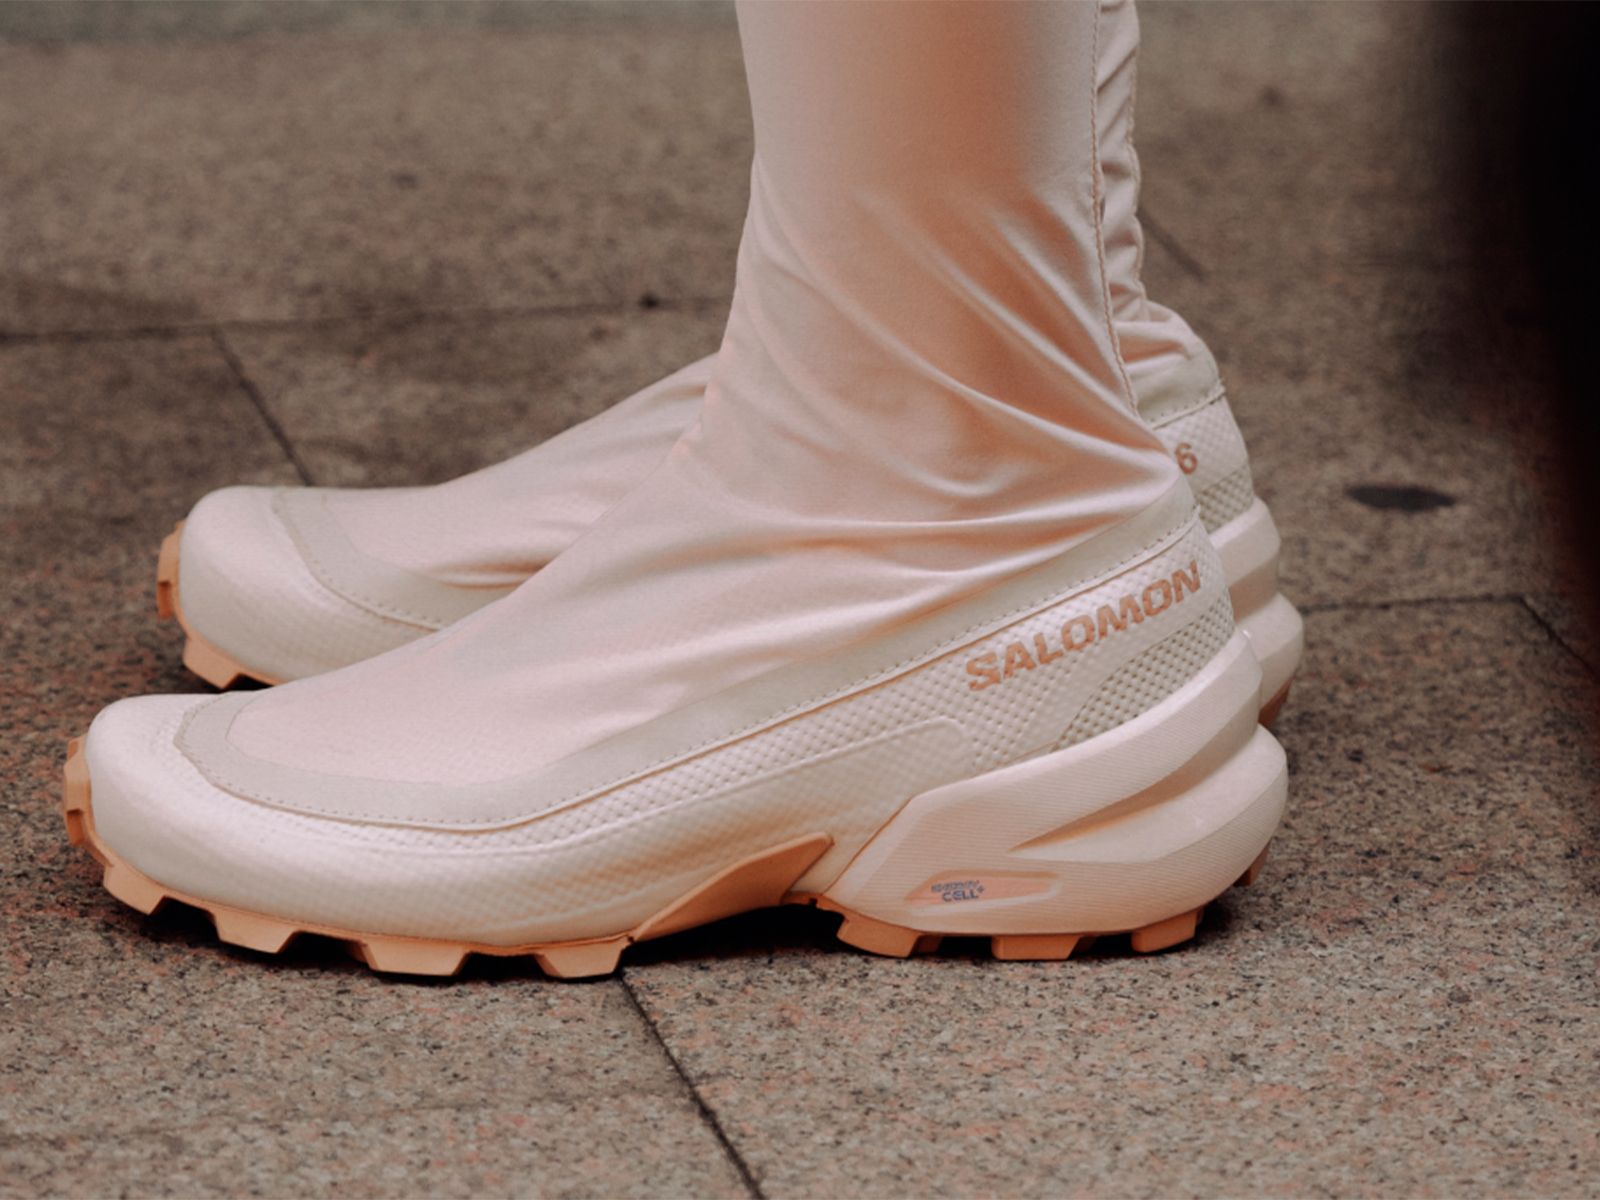 MM6 Maison Margiela and Salomon: the collaboration we needed